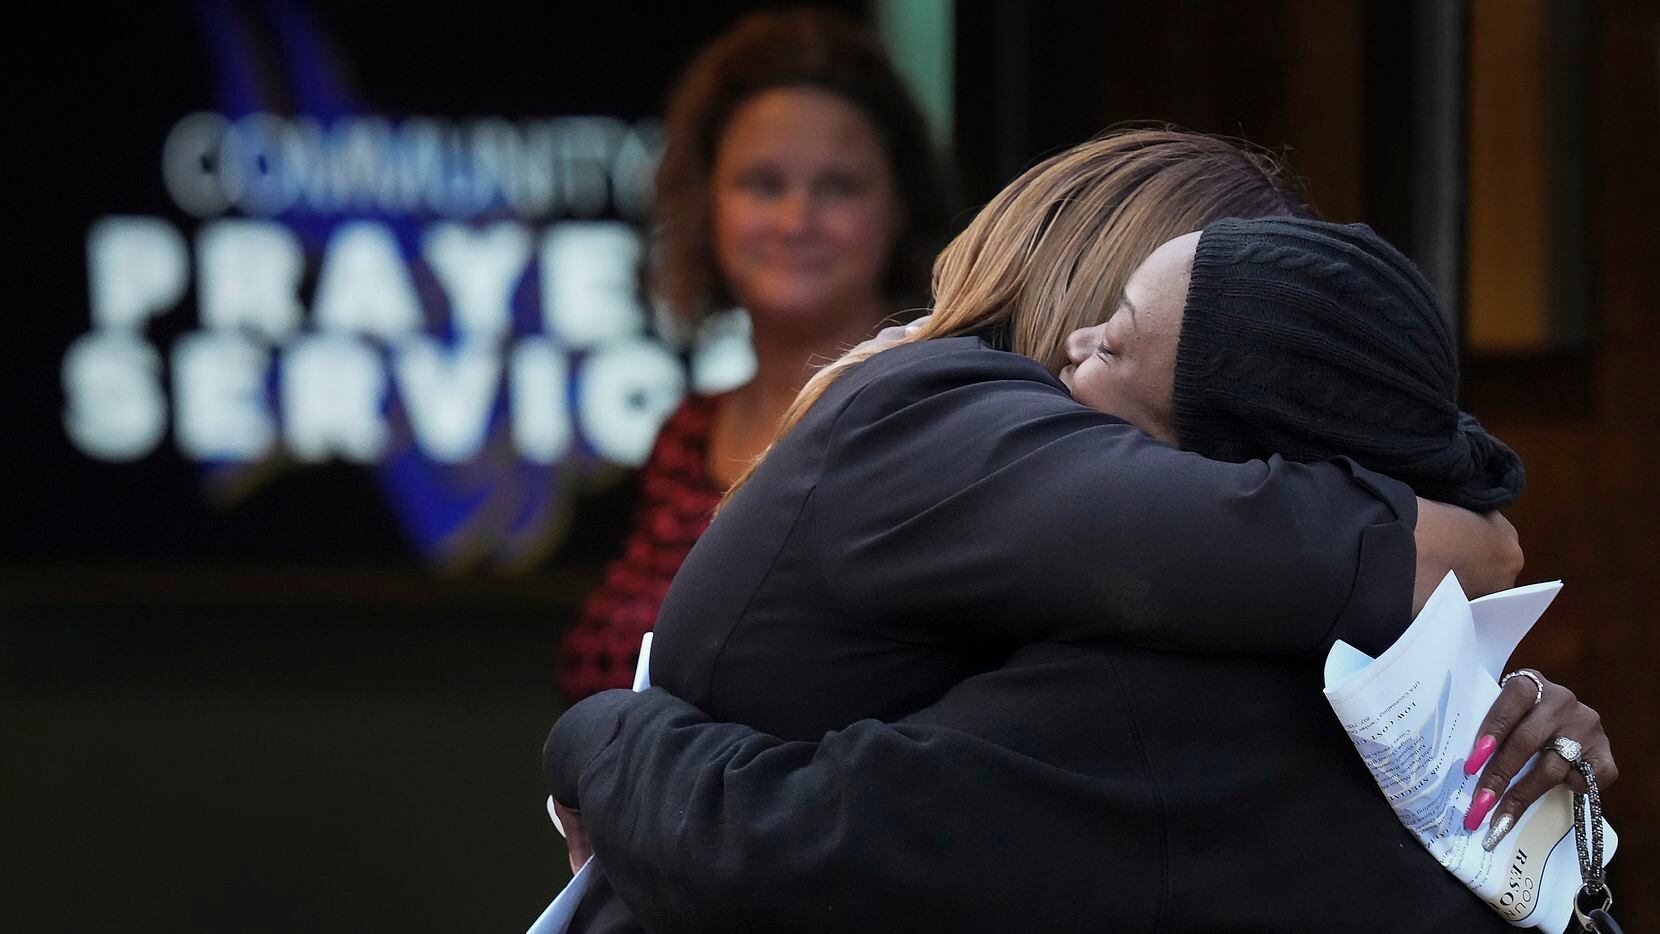 Shaniqua Williams (facing), a family member of the shooting victim, was consoled by Melinda...